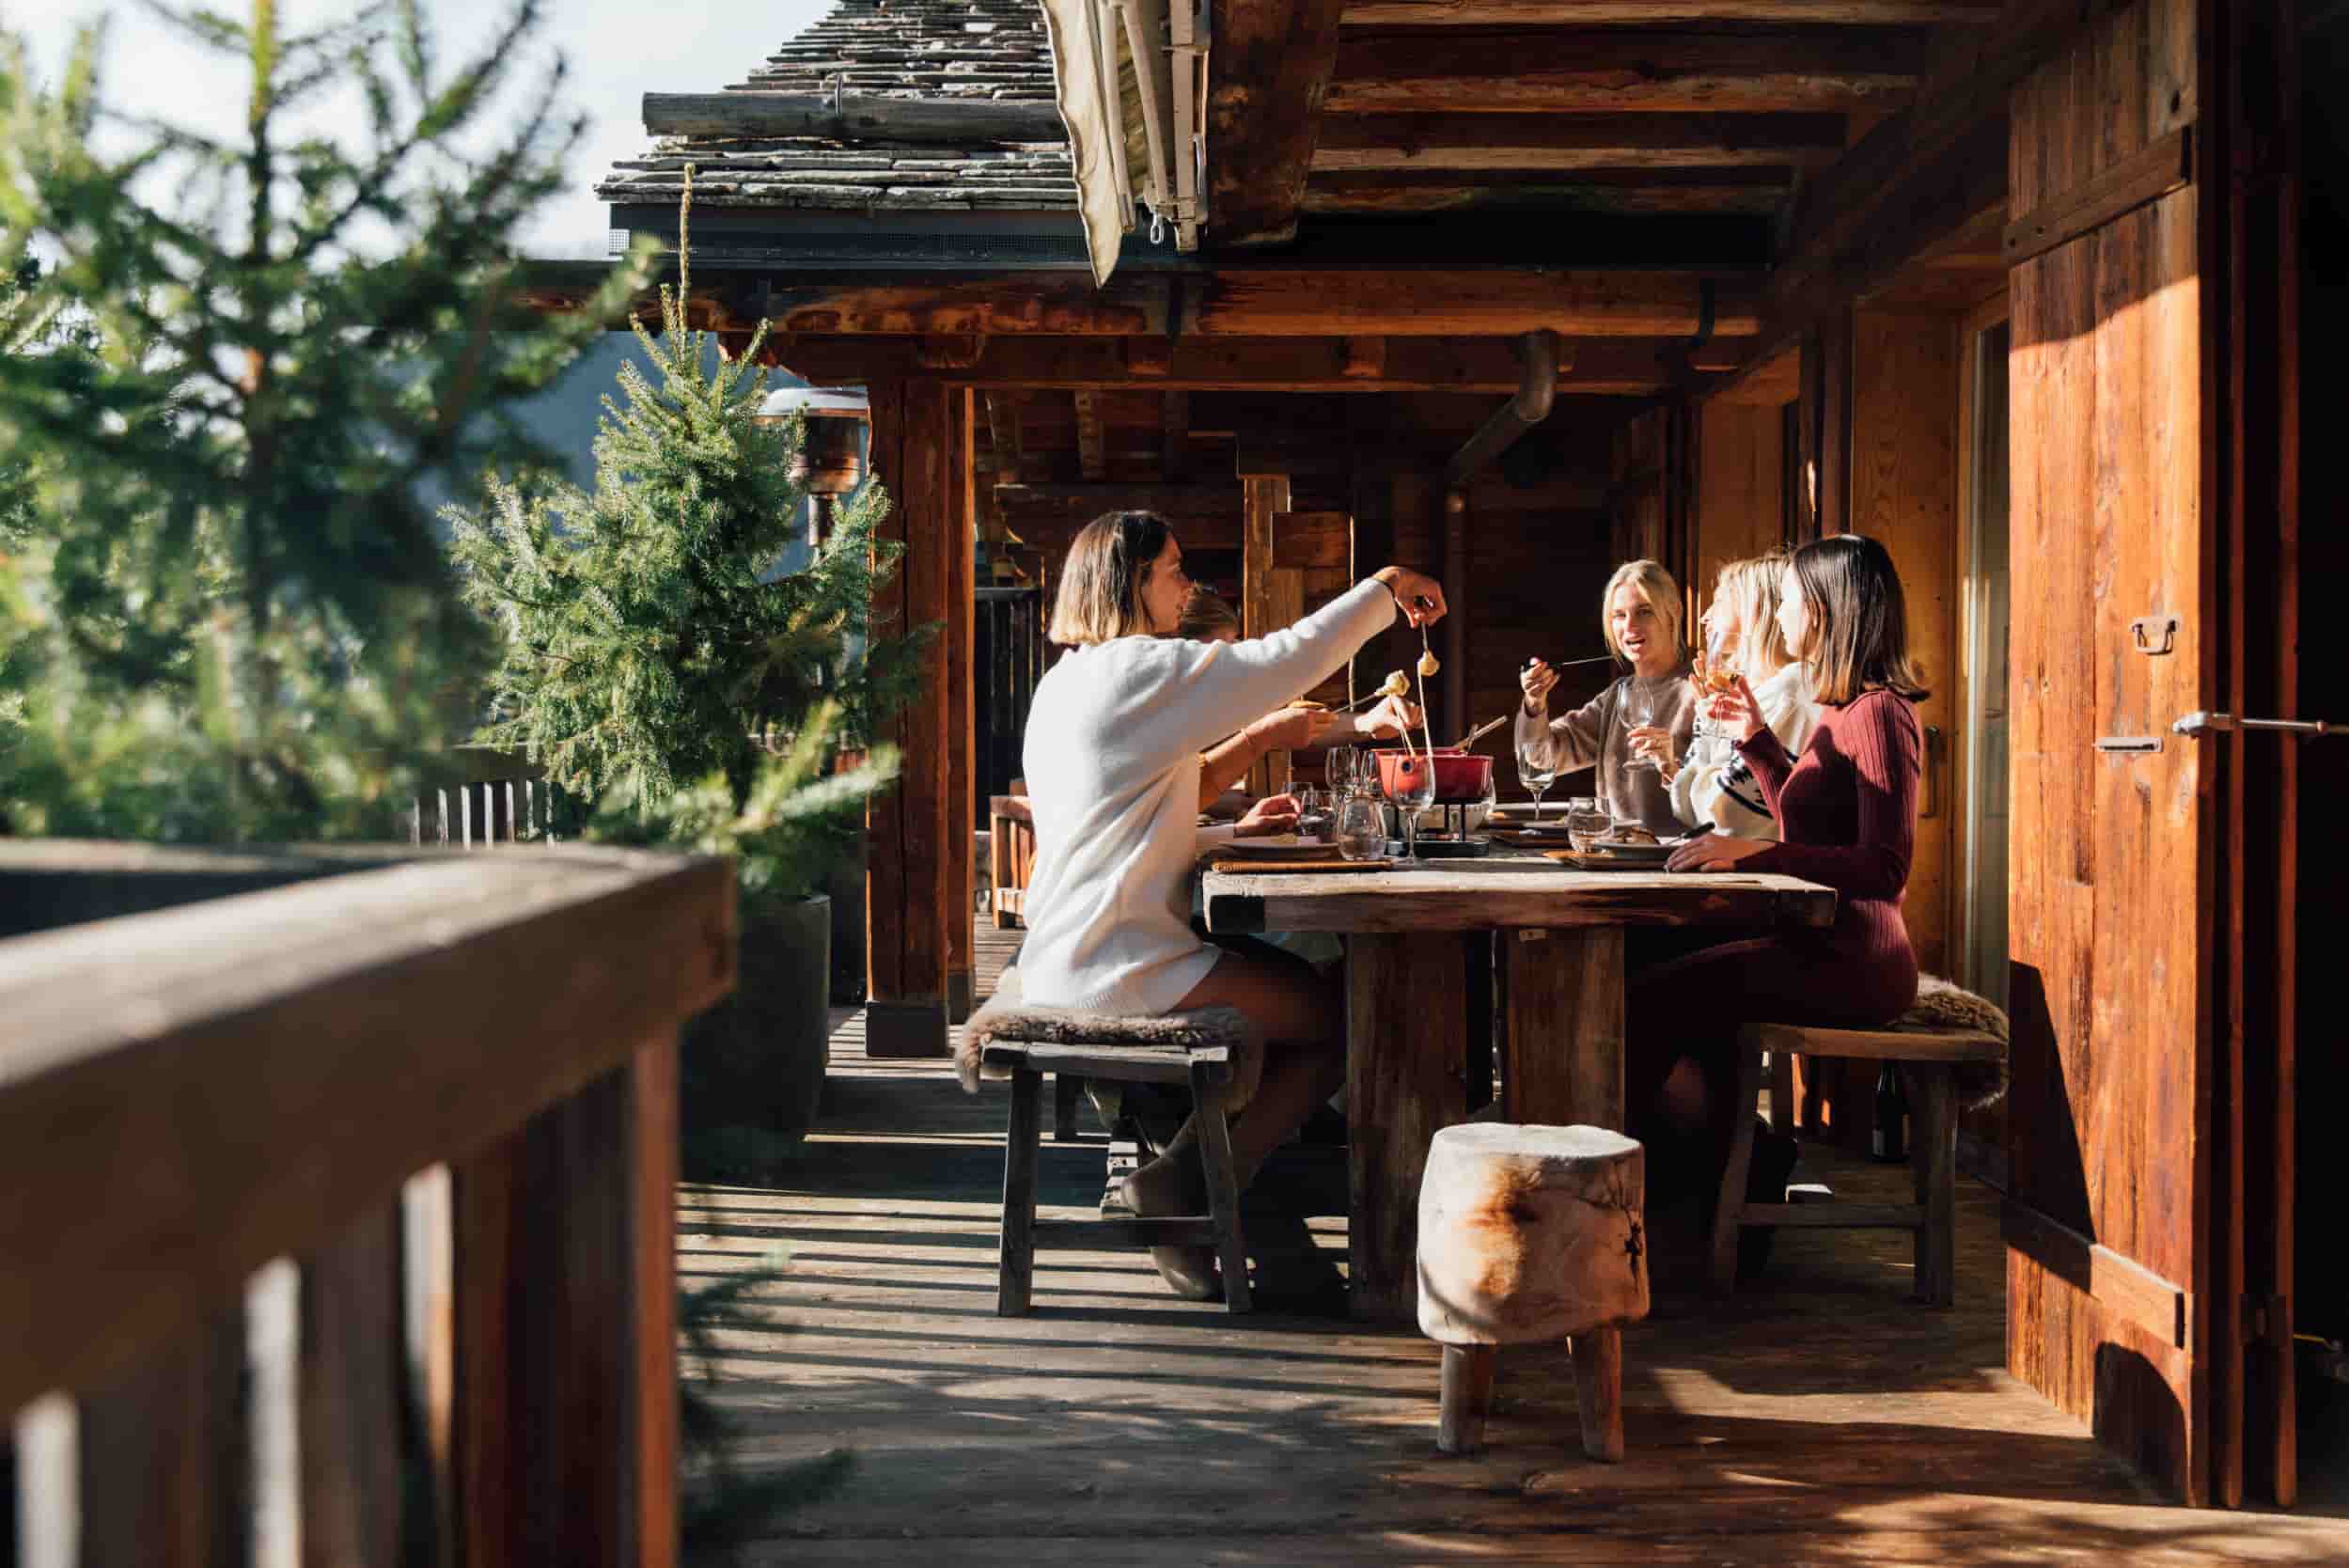 Verbier-ski-in-ski-out-fondue-and-trees-min